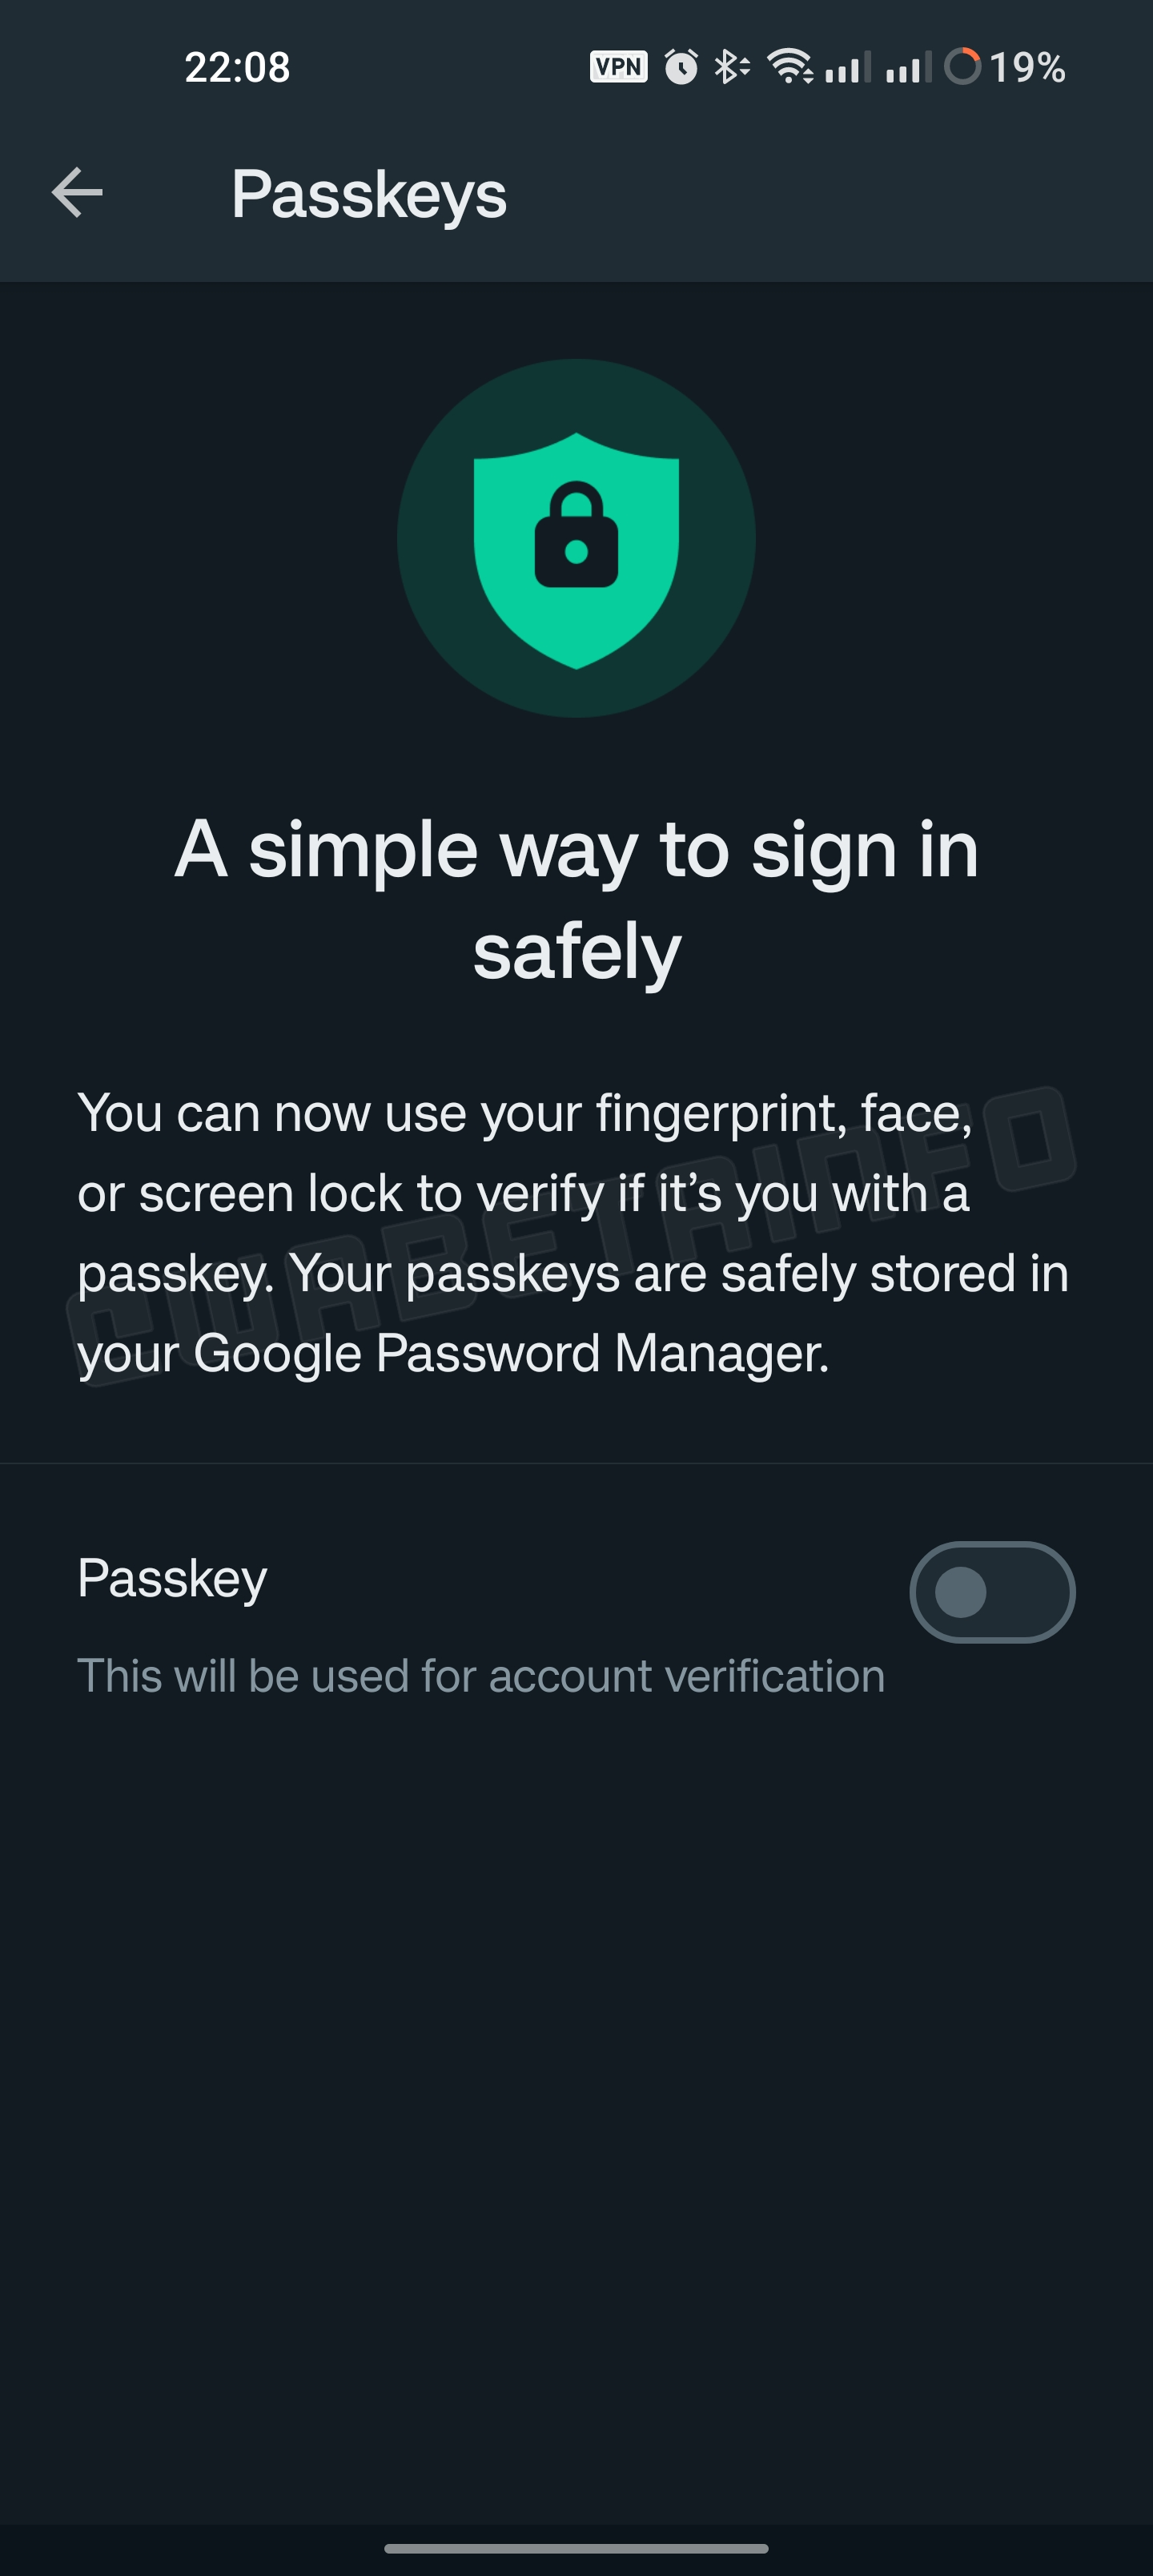 WA PASSKEY FEATURE ACCOUNT VERIFICATION ANDROID